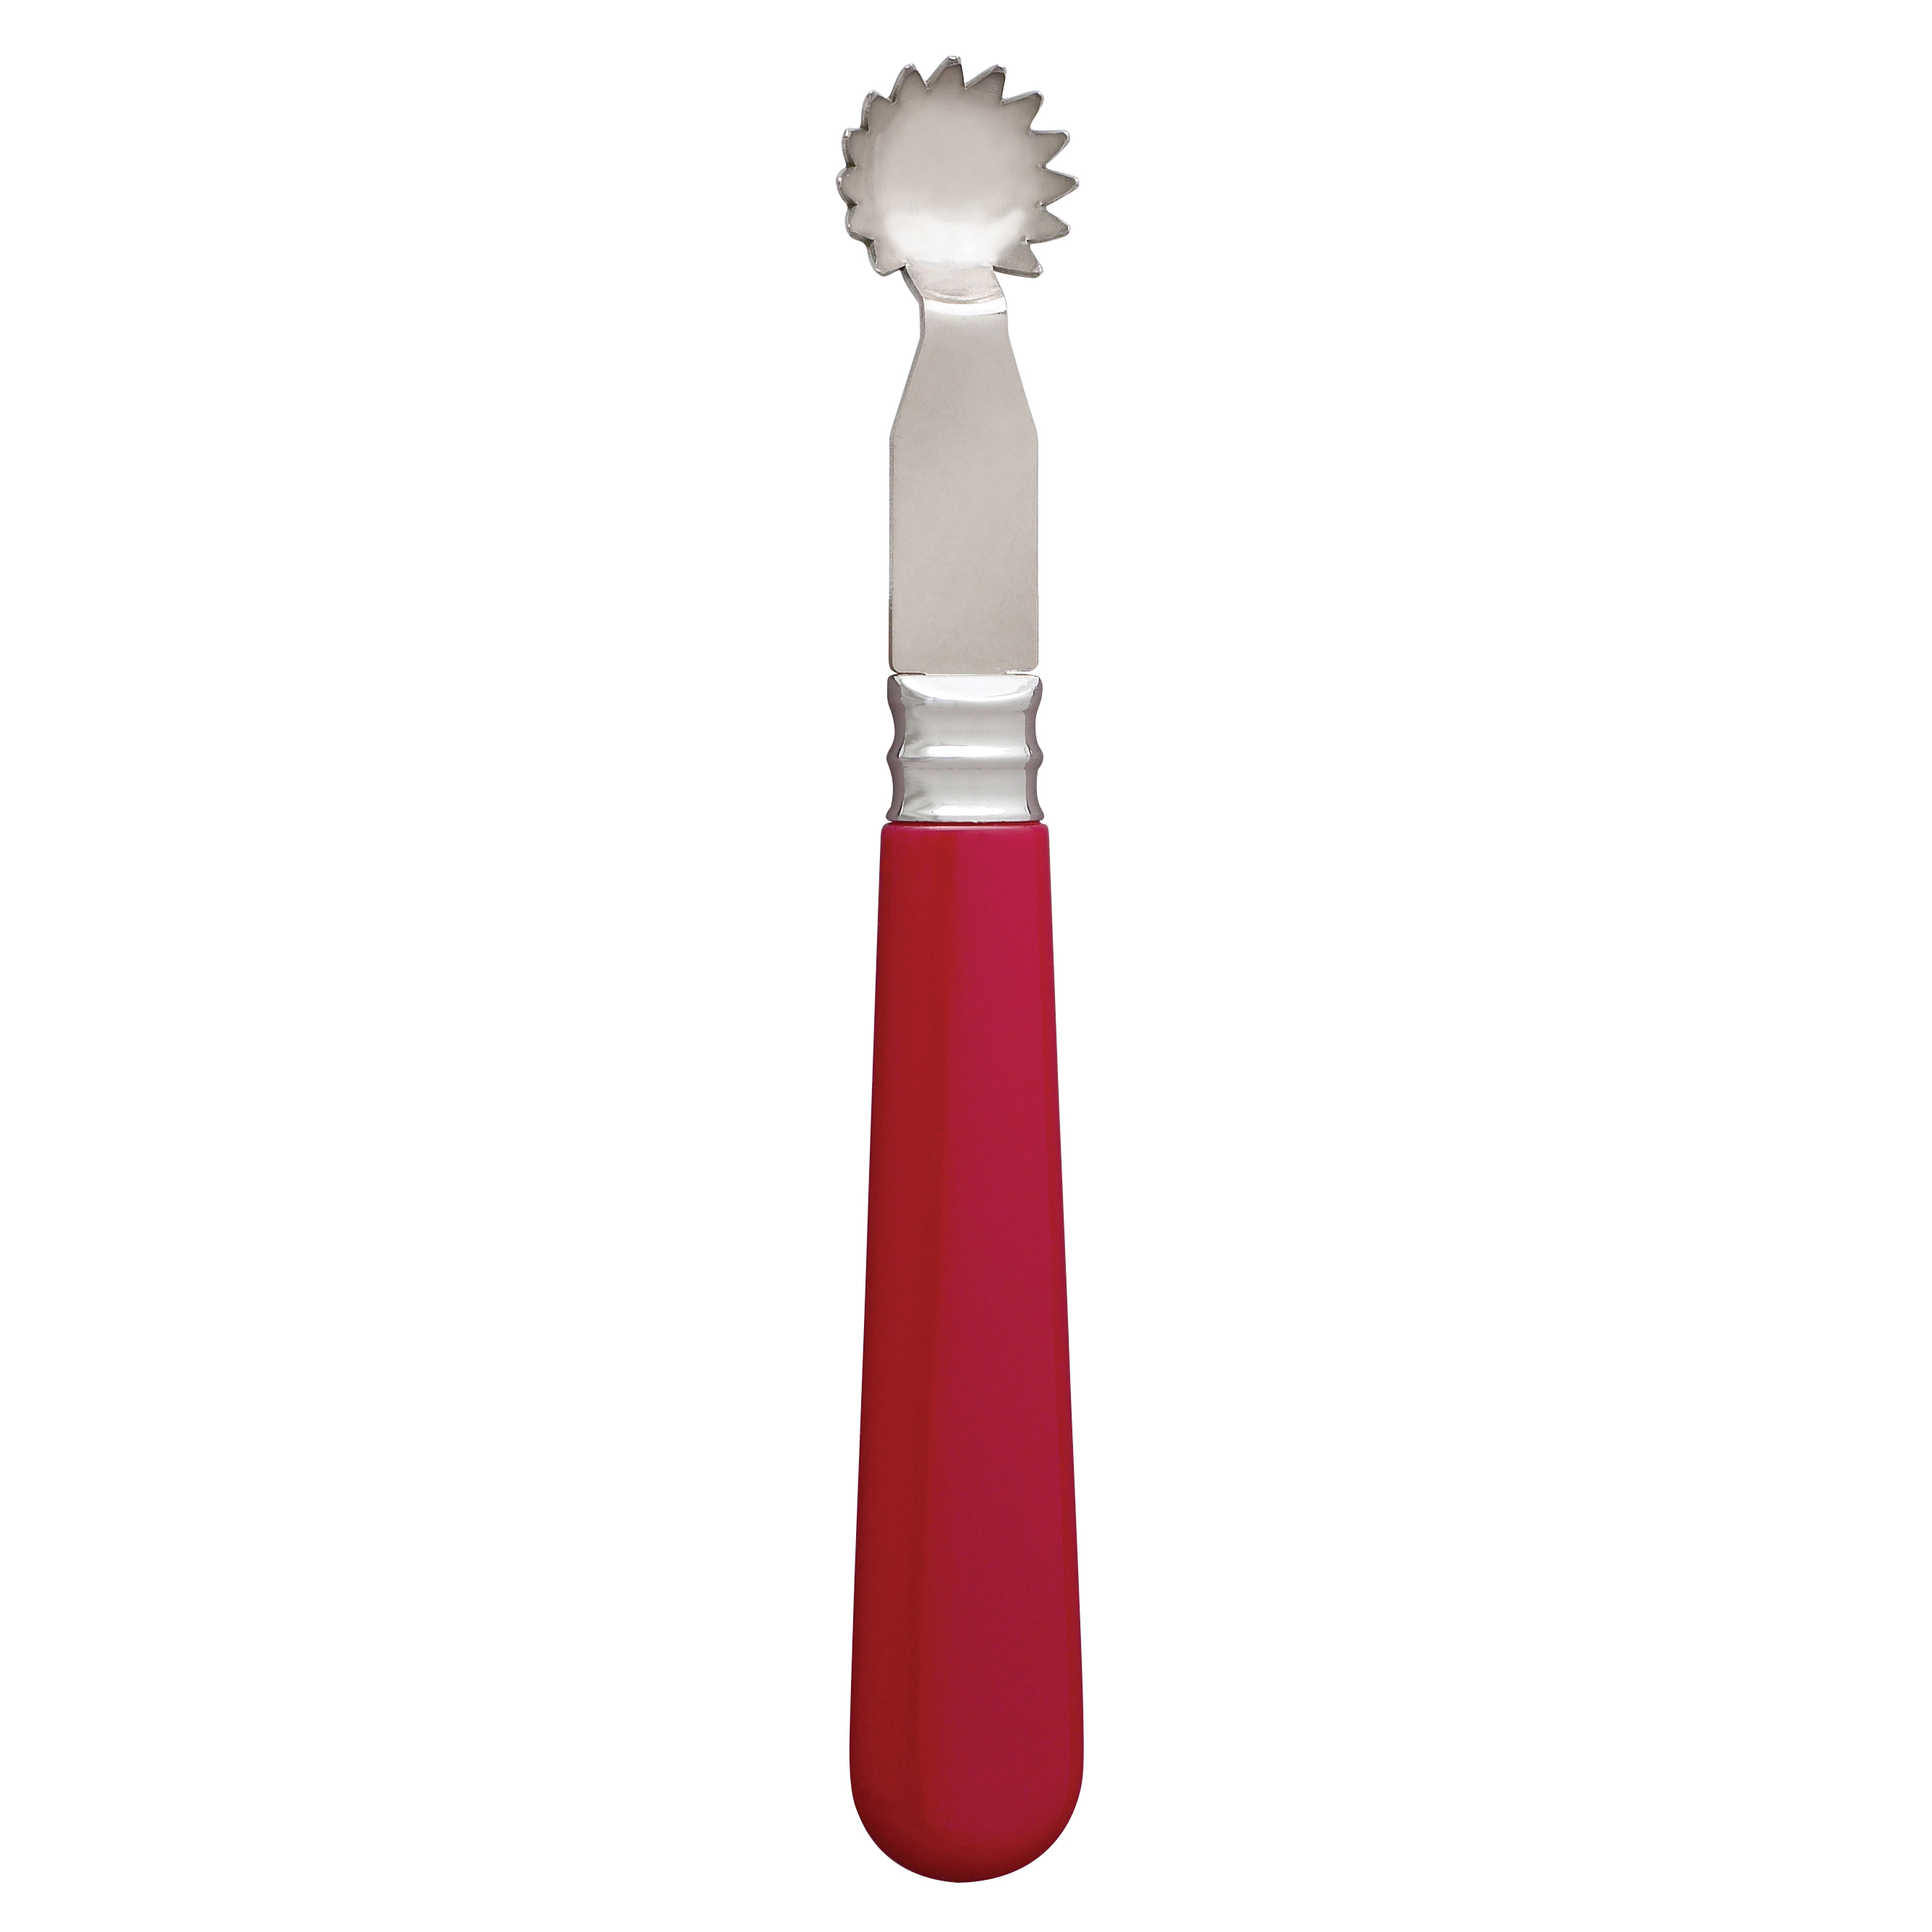 HIC 43217 Tomato Corer, 6-1/2 in L Blade, Stainless Steel Blade, Red, Plastic Handle, Dishwasher Safe: Yes - 2